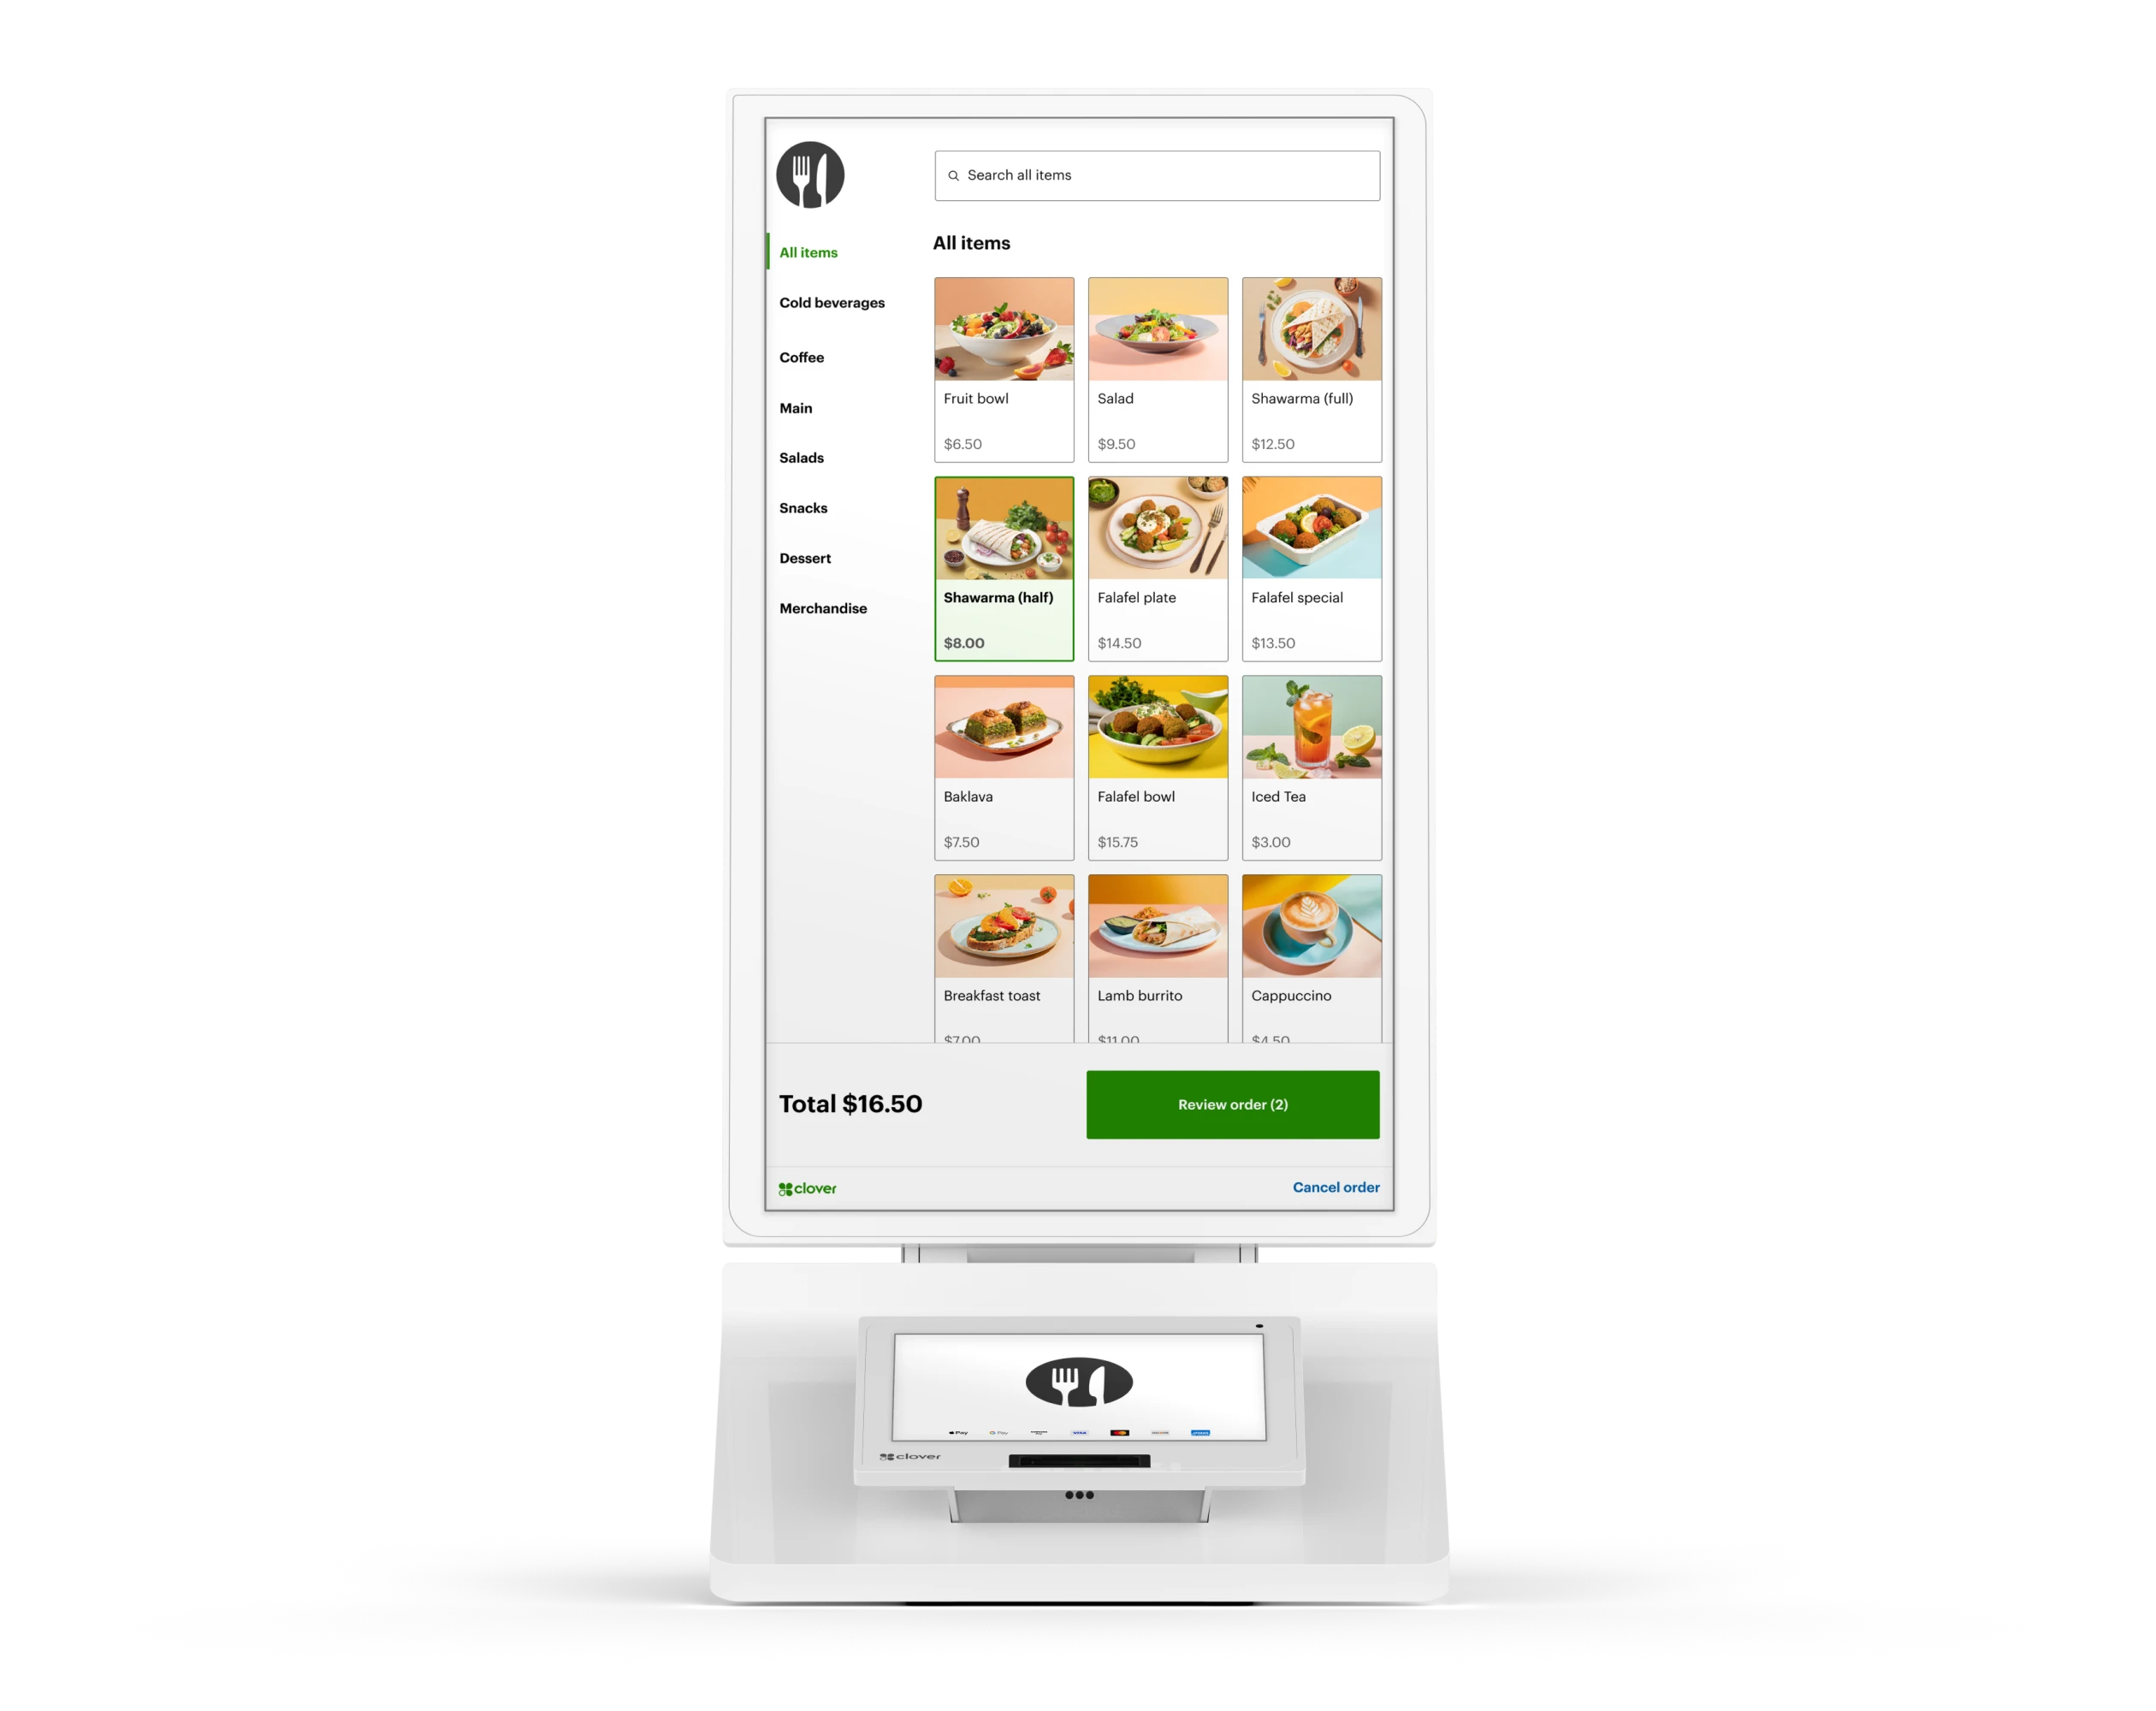 Kiosk ordering screen with menu item pictures, descriptions, and prices displayed.